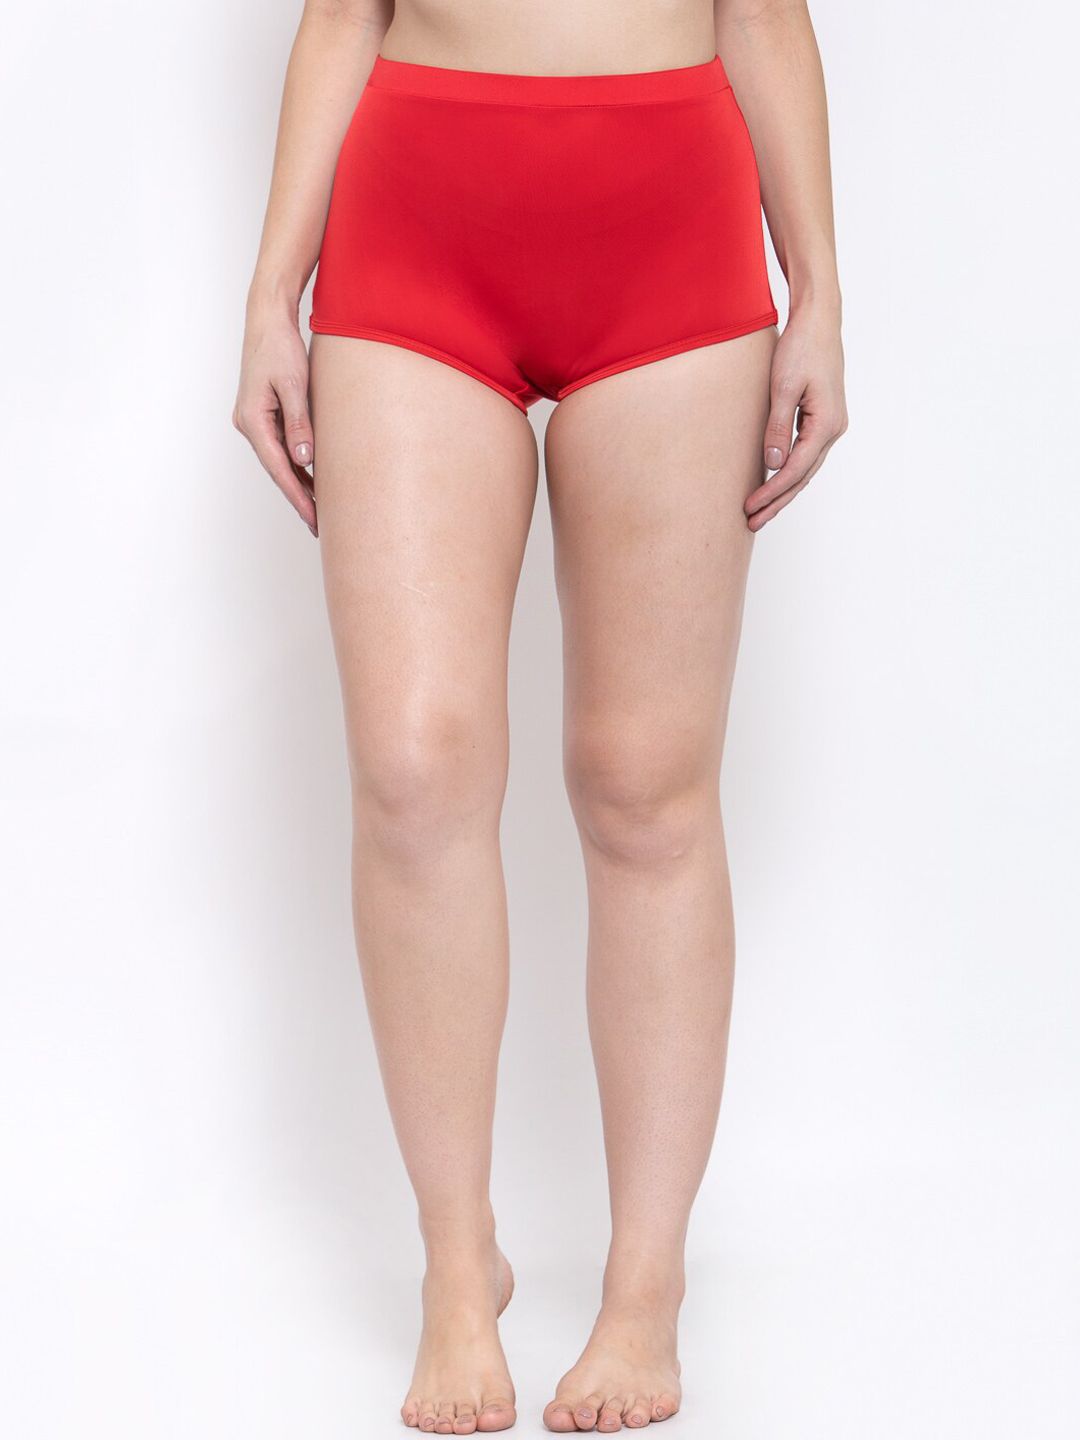 CUKOO Women Red Solid Swim Briefs CK19-193 Price in India